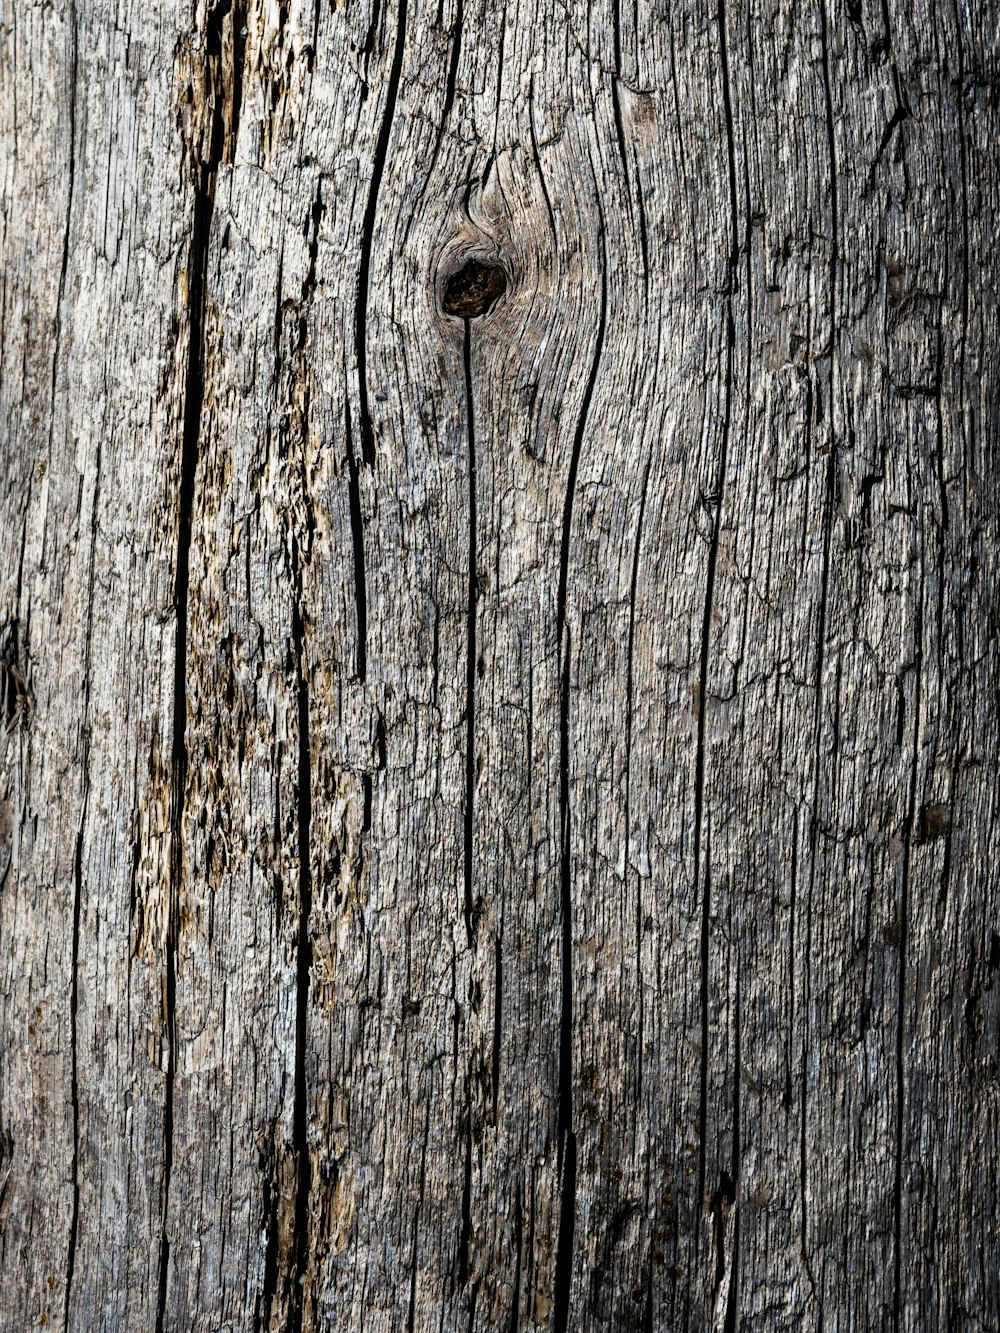 a close up of a wooden surface with knots